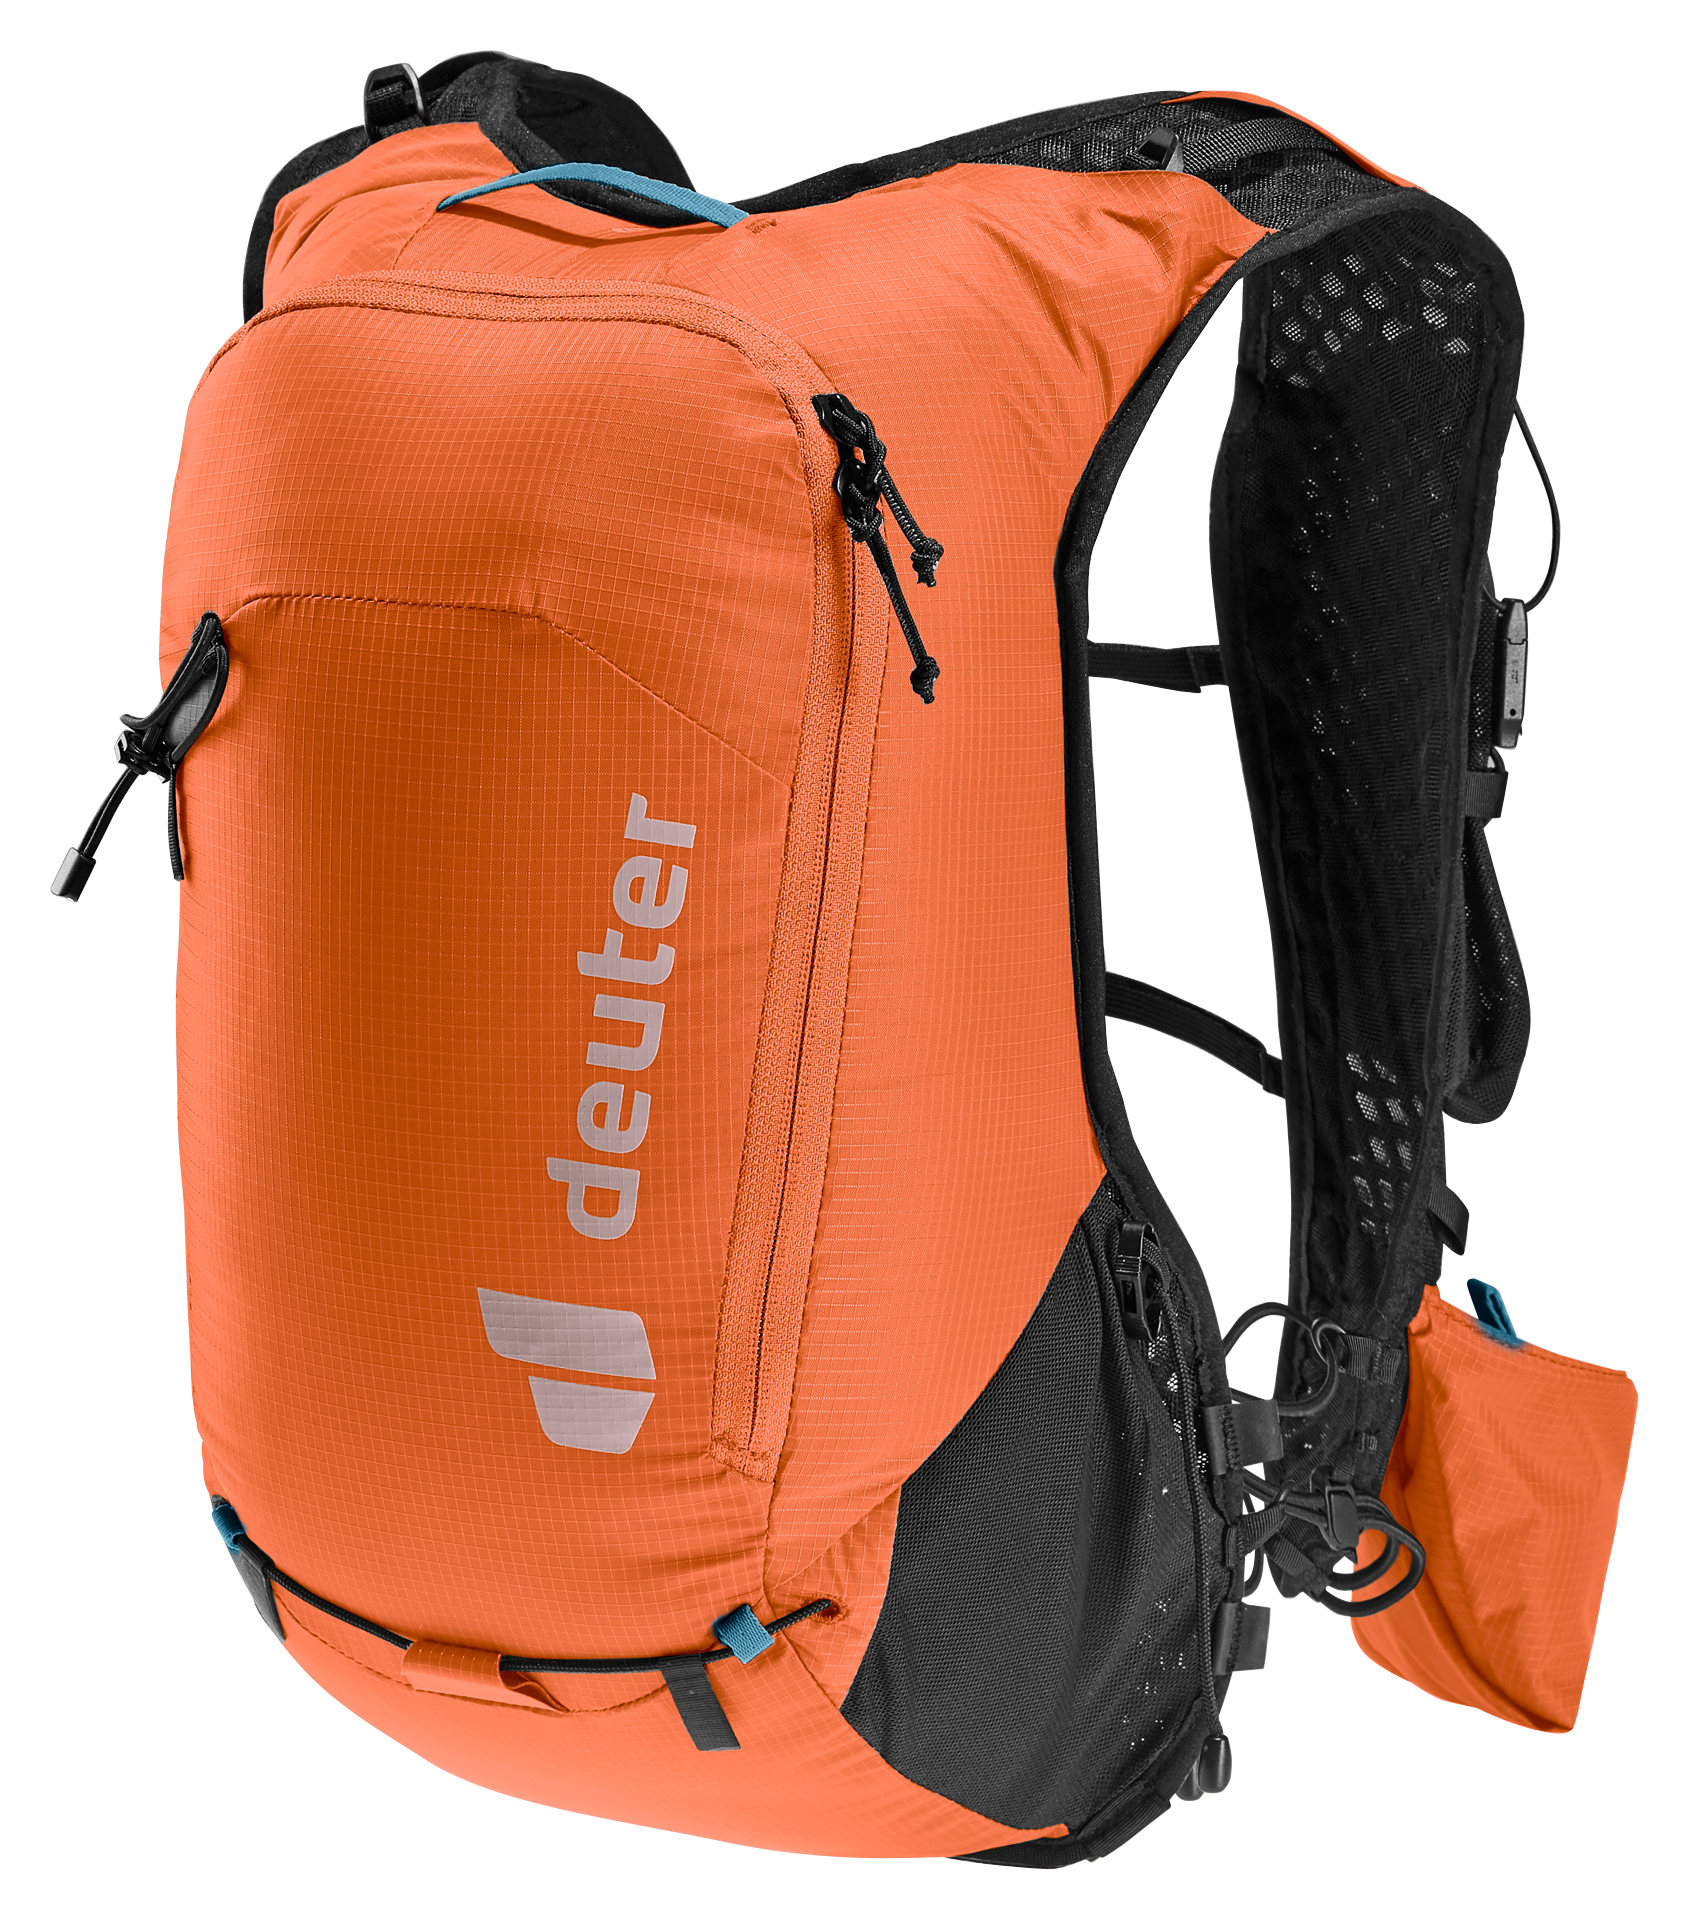 Deuter Pulse 5 chestnut-teal - 391022393190, Sports bags and Backpacks